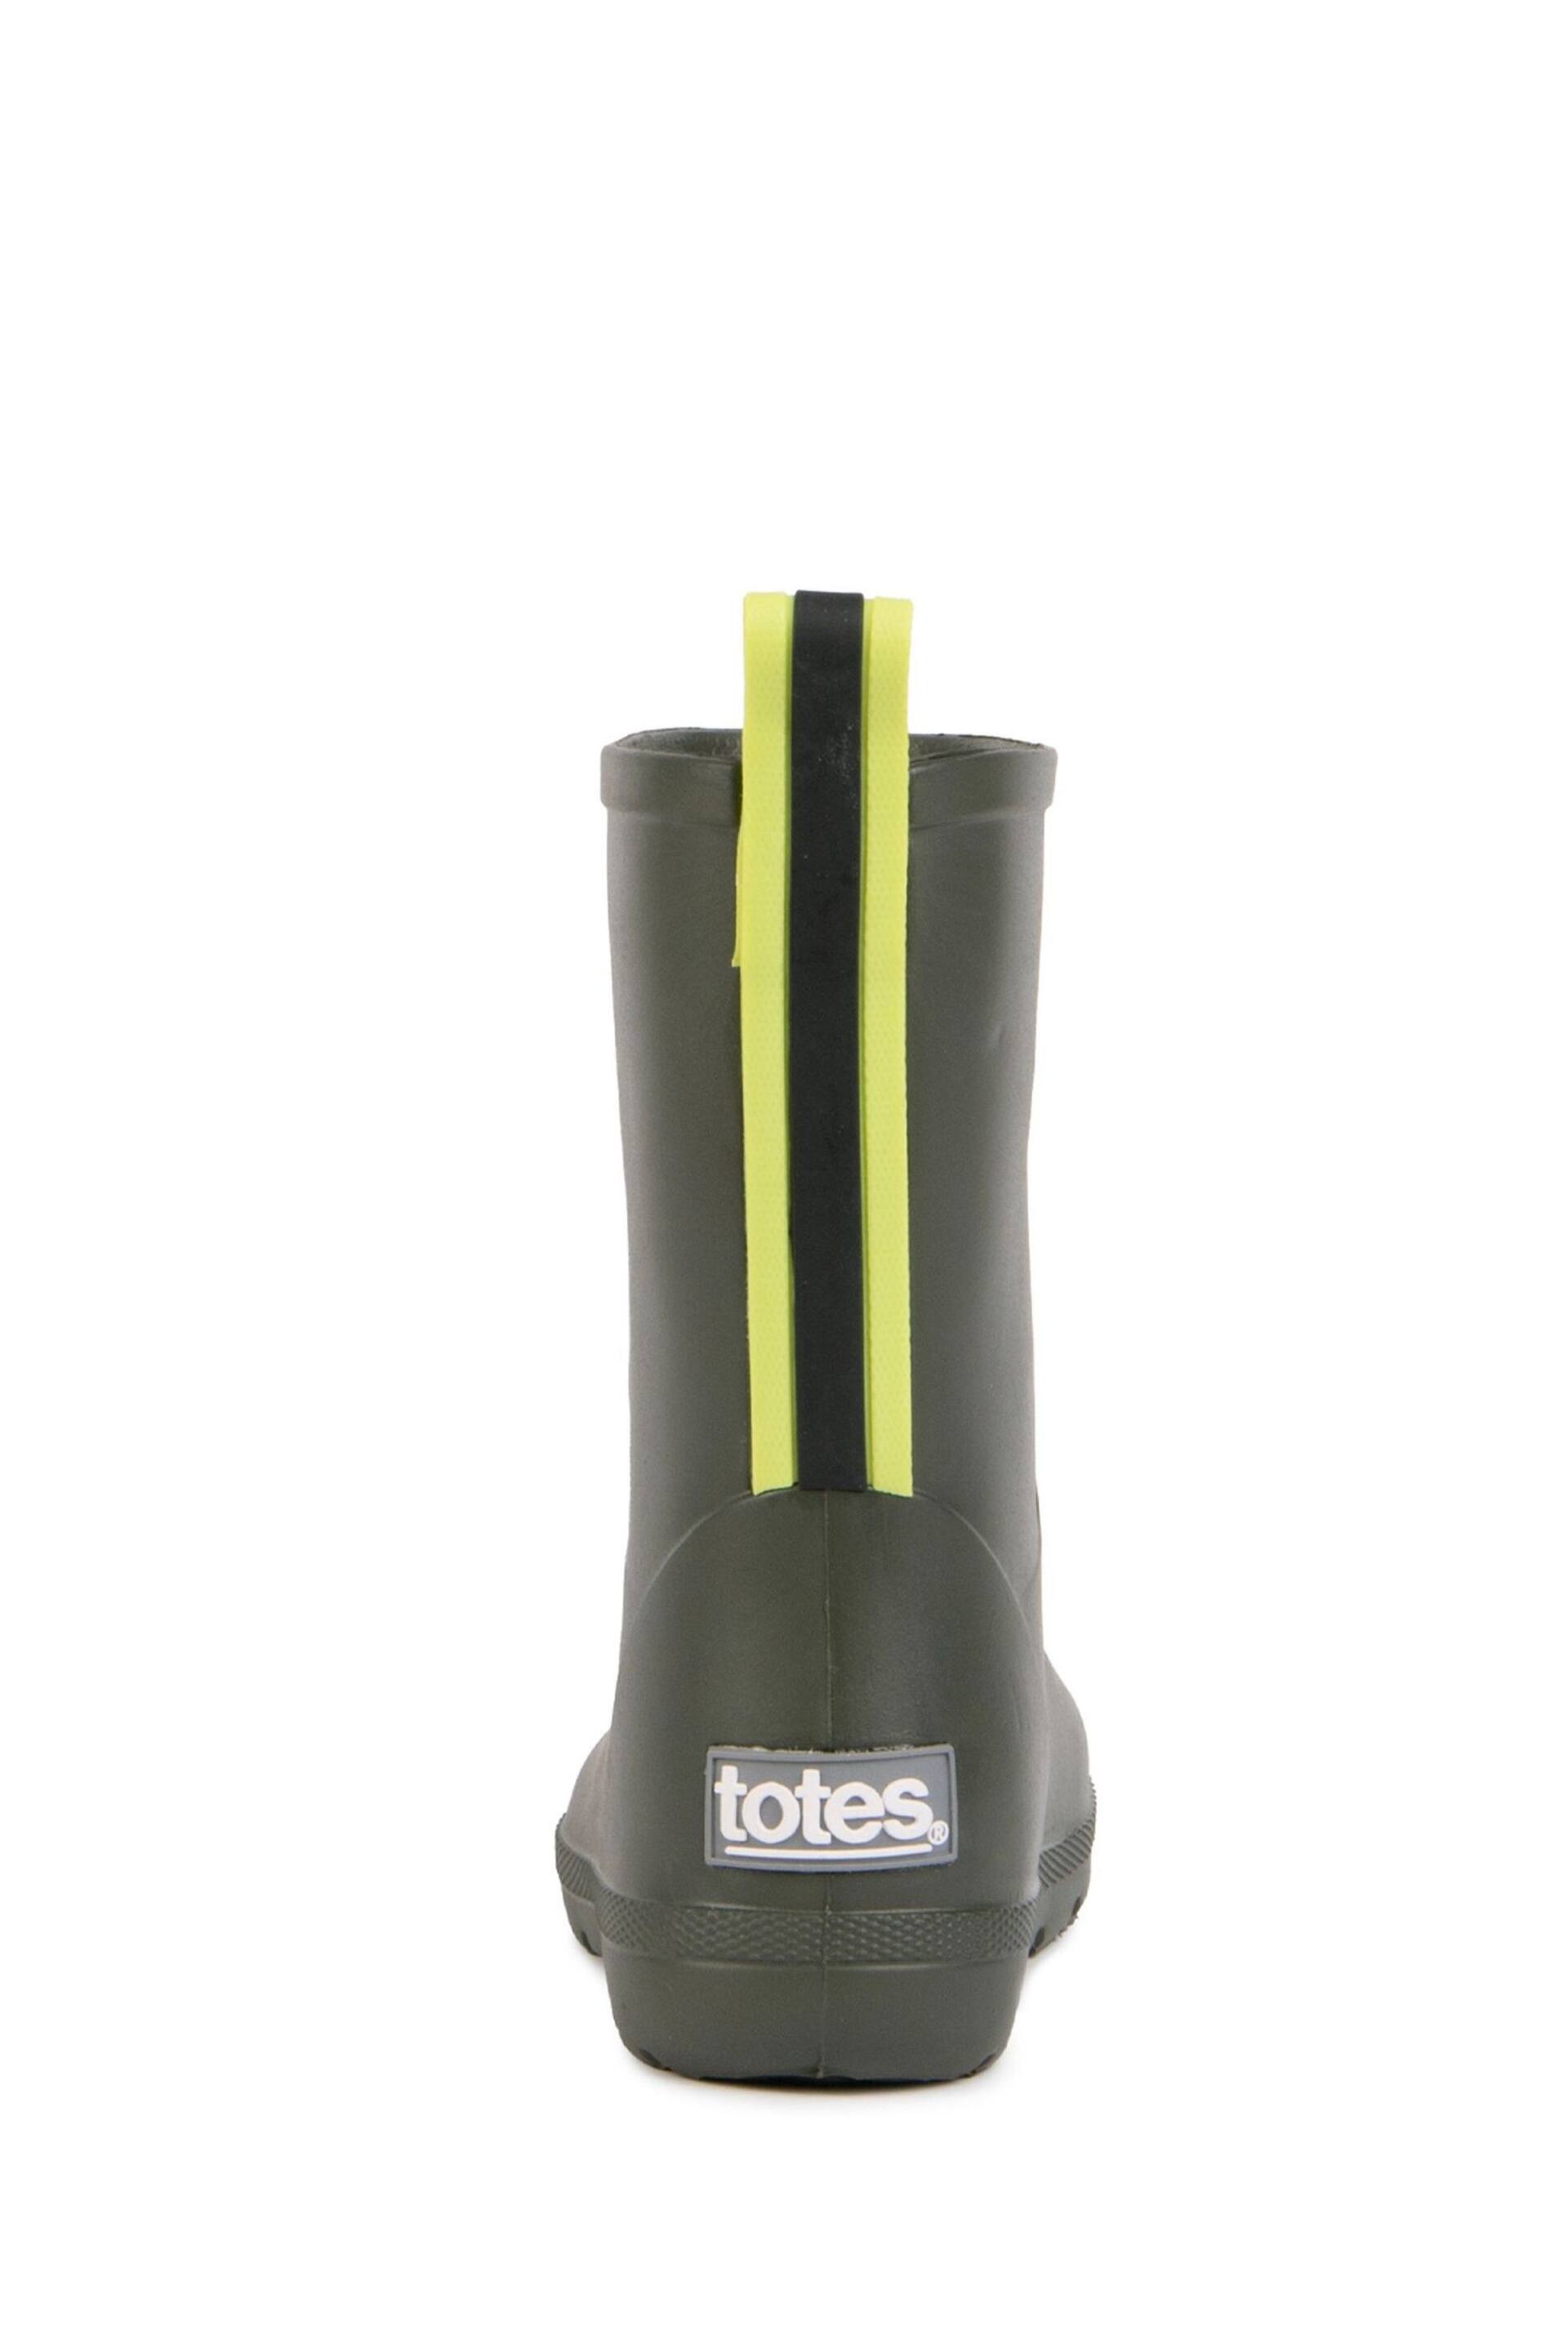 Totes Green Childrens Charley Welly Boots - Image 4 of 5